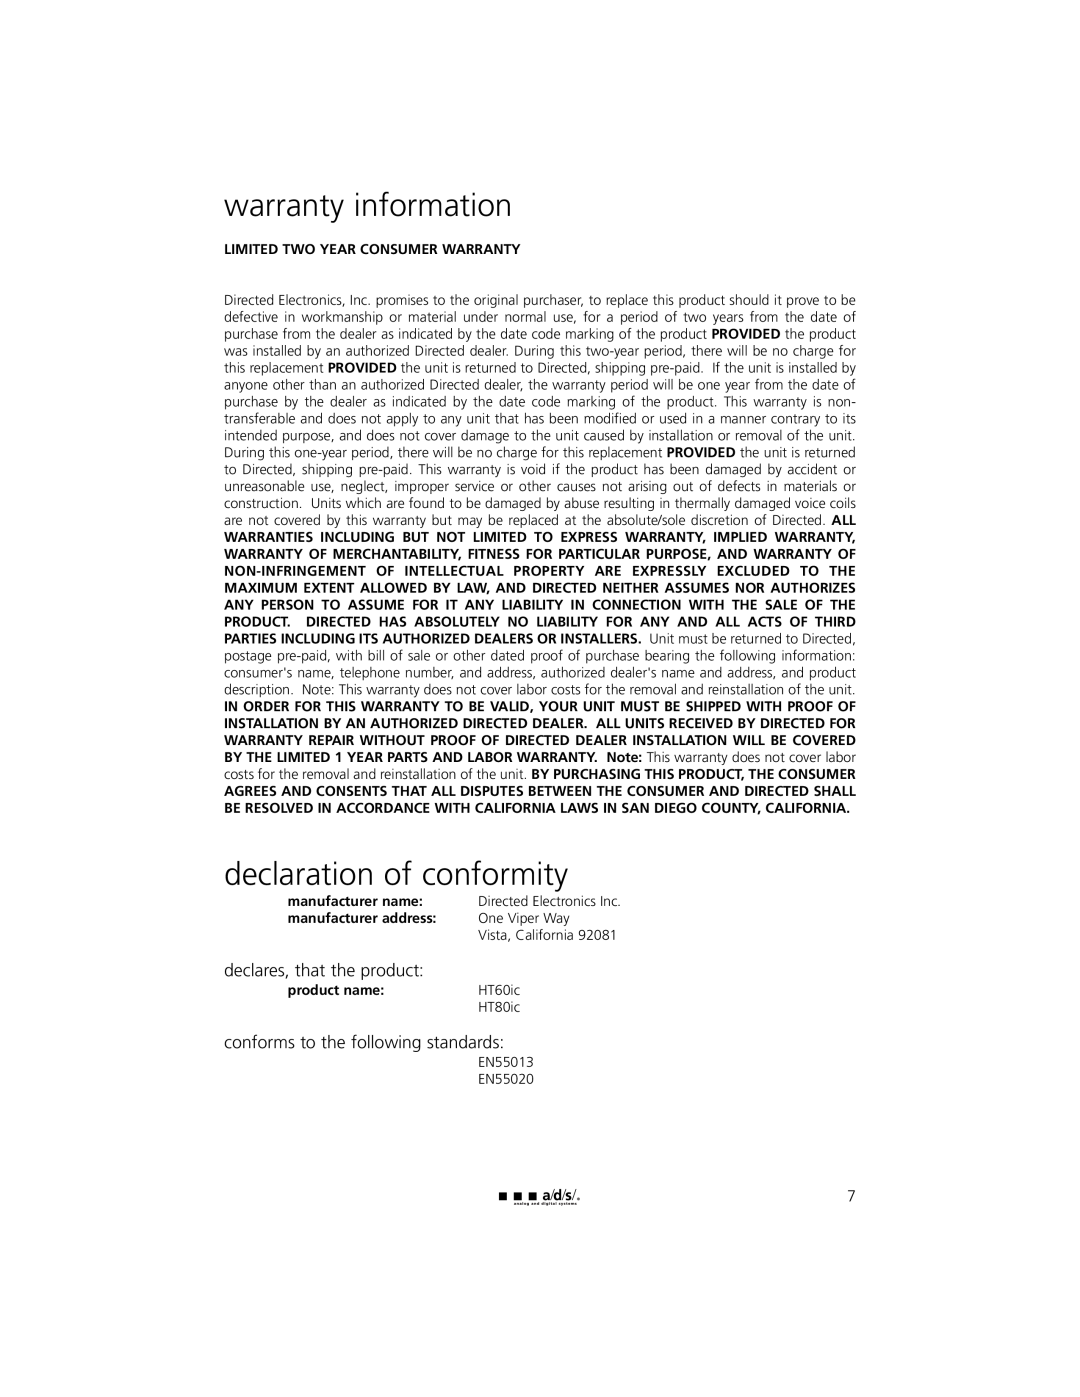 ADS Technologies HT60IC warranty information, declaration of conformity, declares, that the product, manufacturer name 